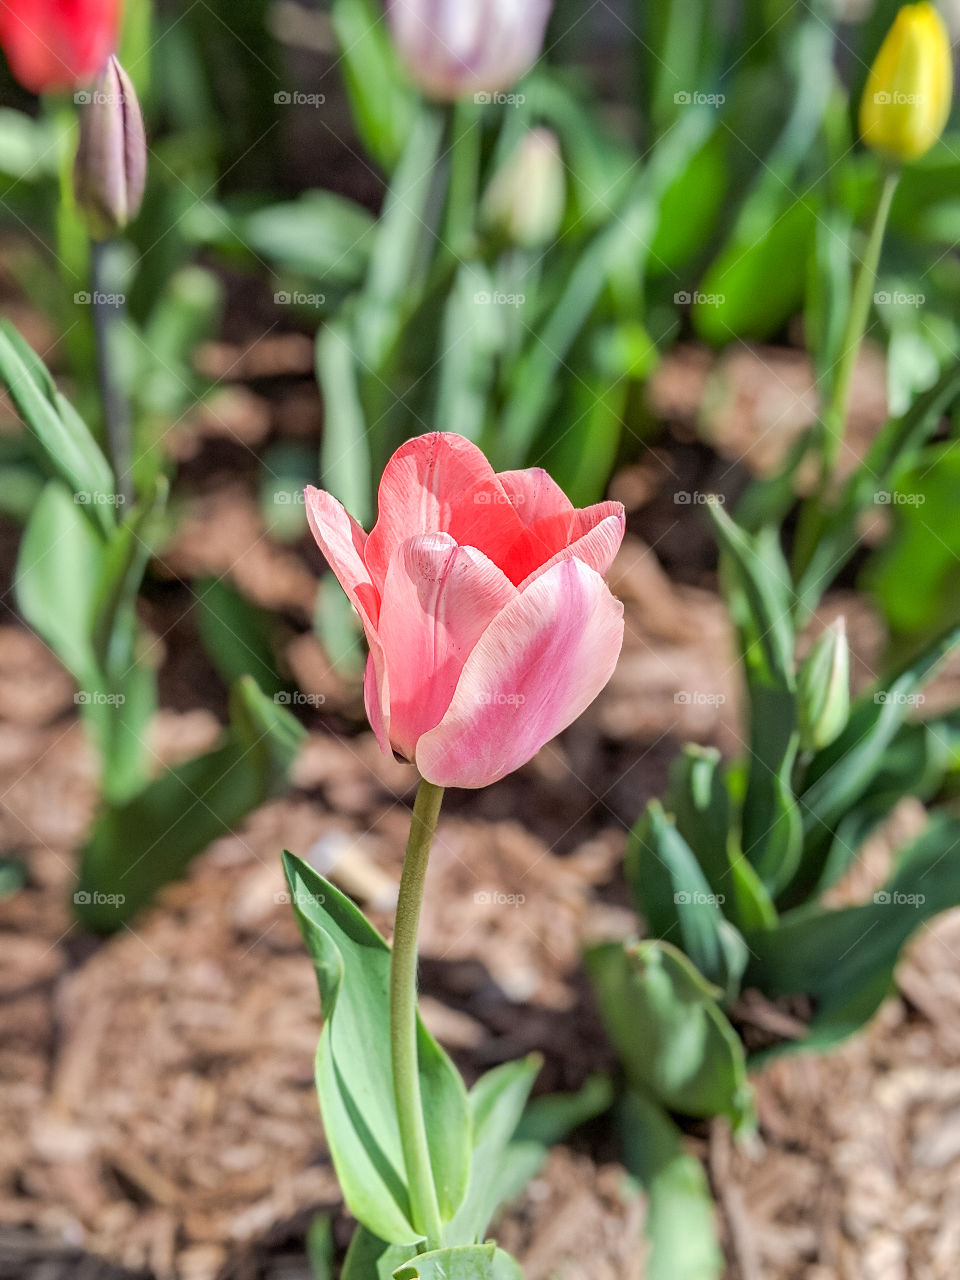 Vibrant Bright and Colorful Single Pink Tulip